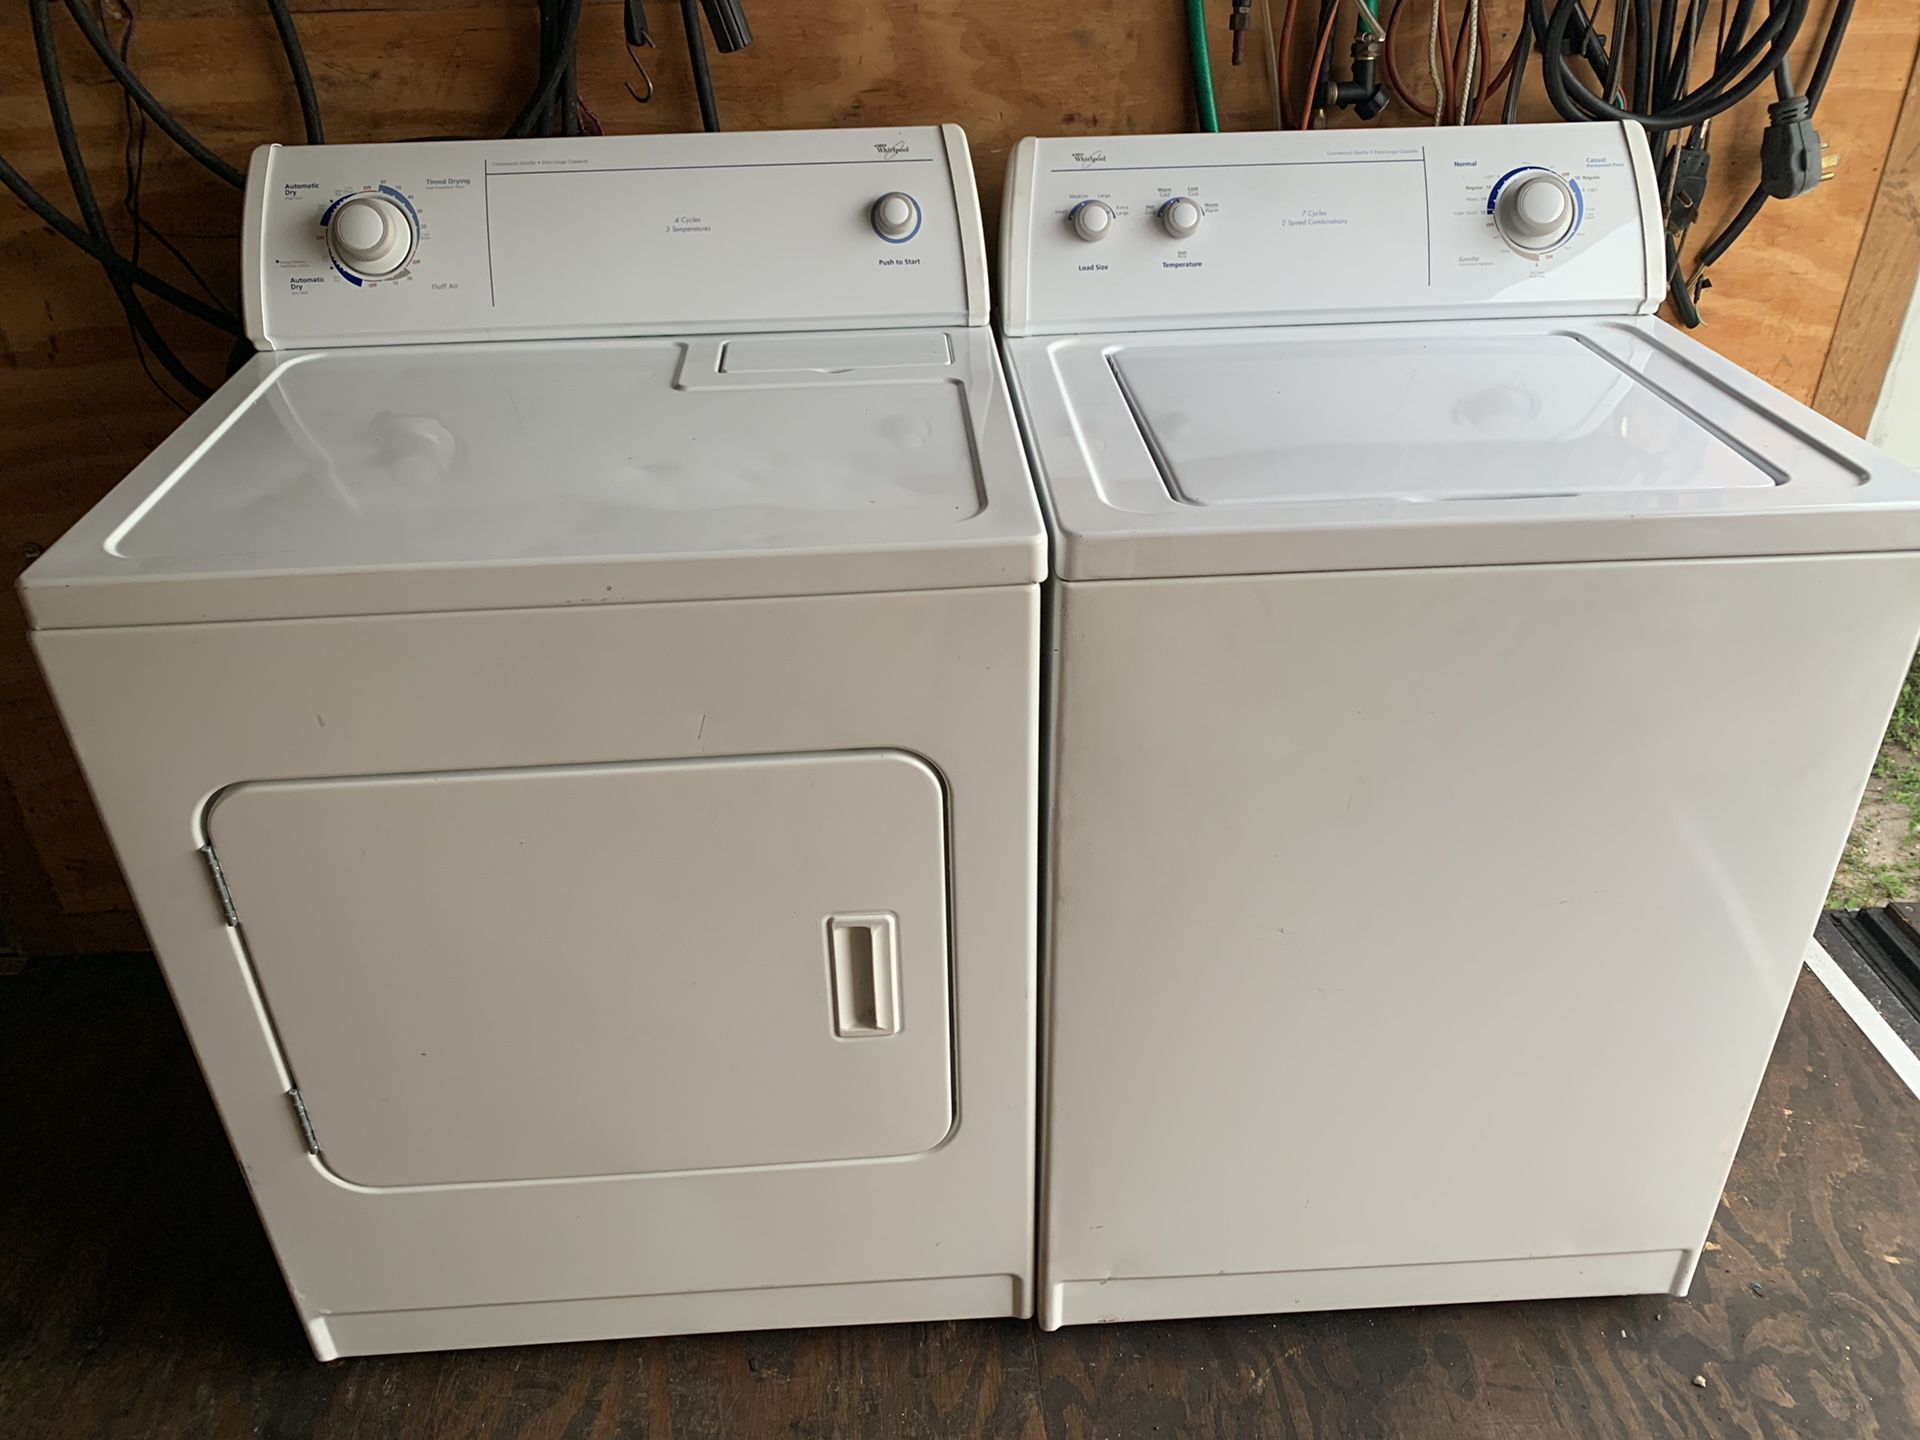 Washer and Dryer Set whirlpool Firm price